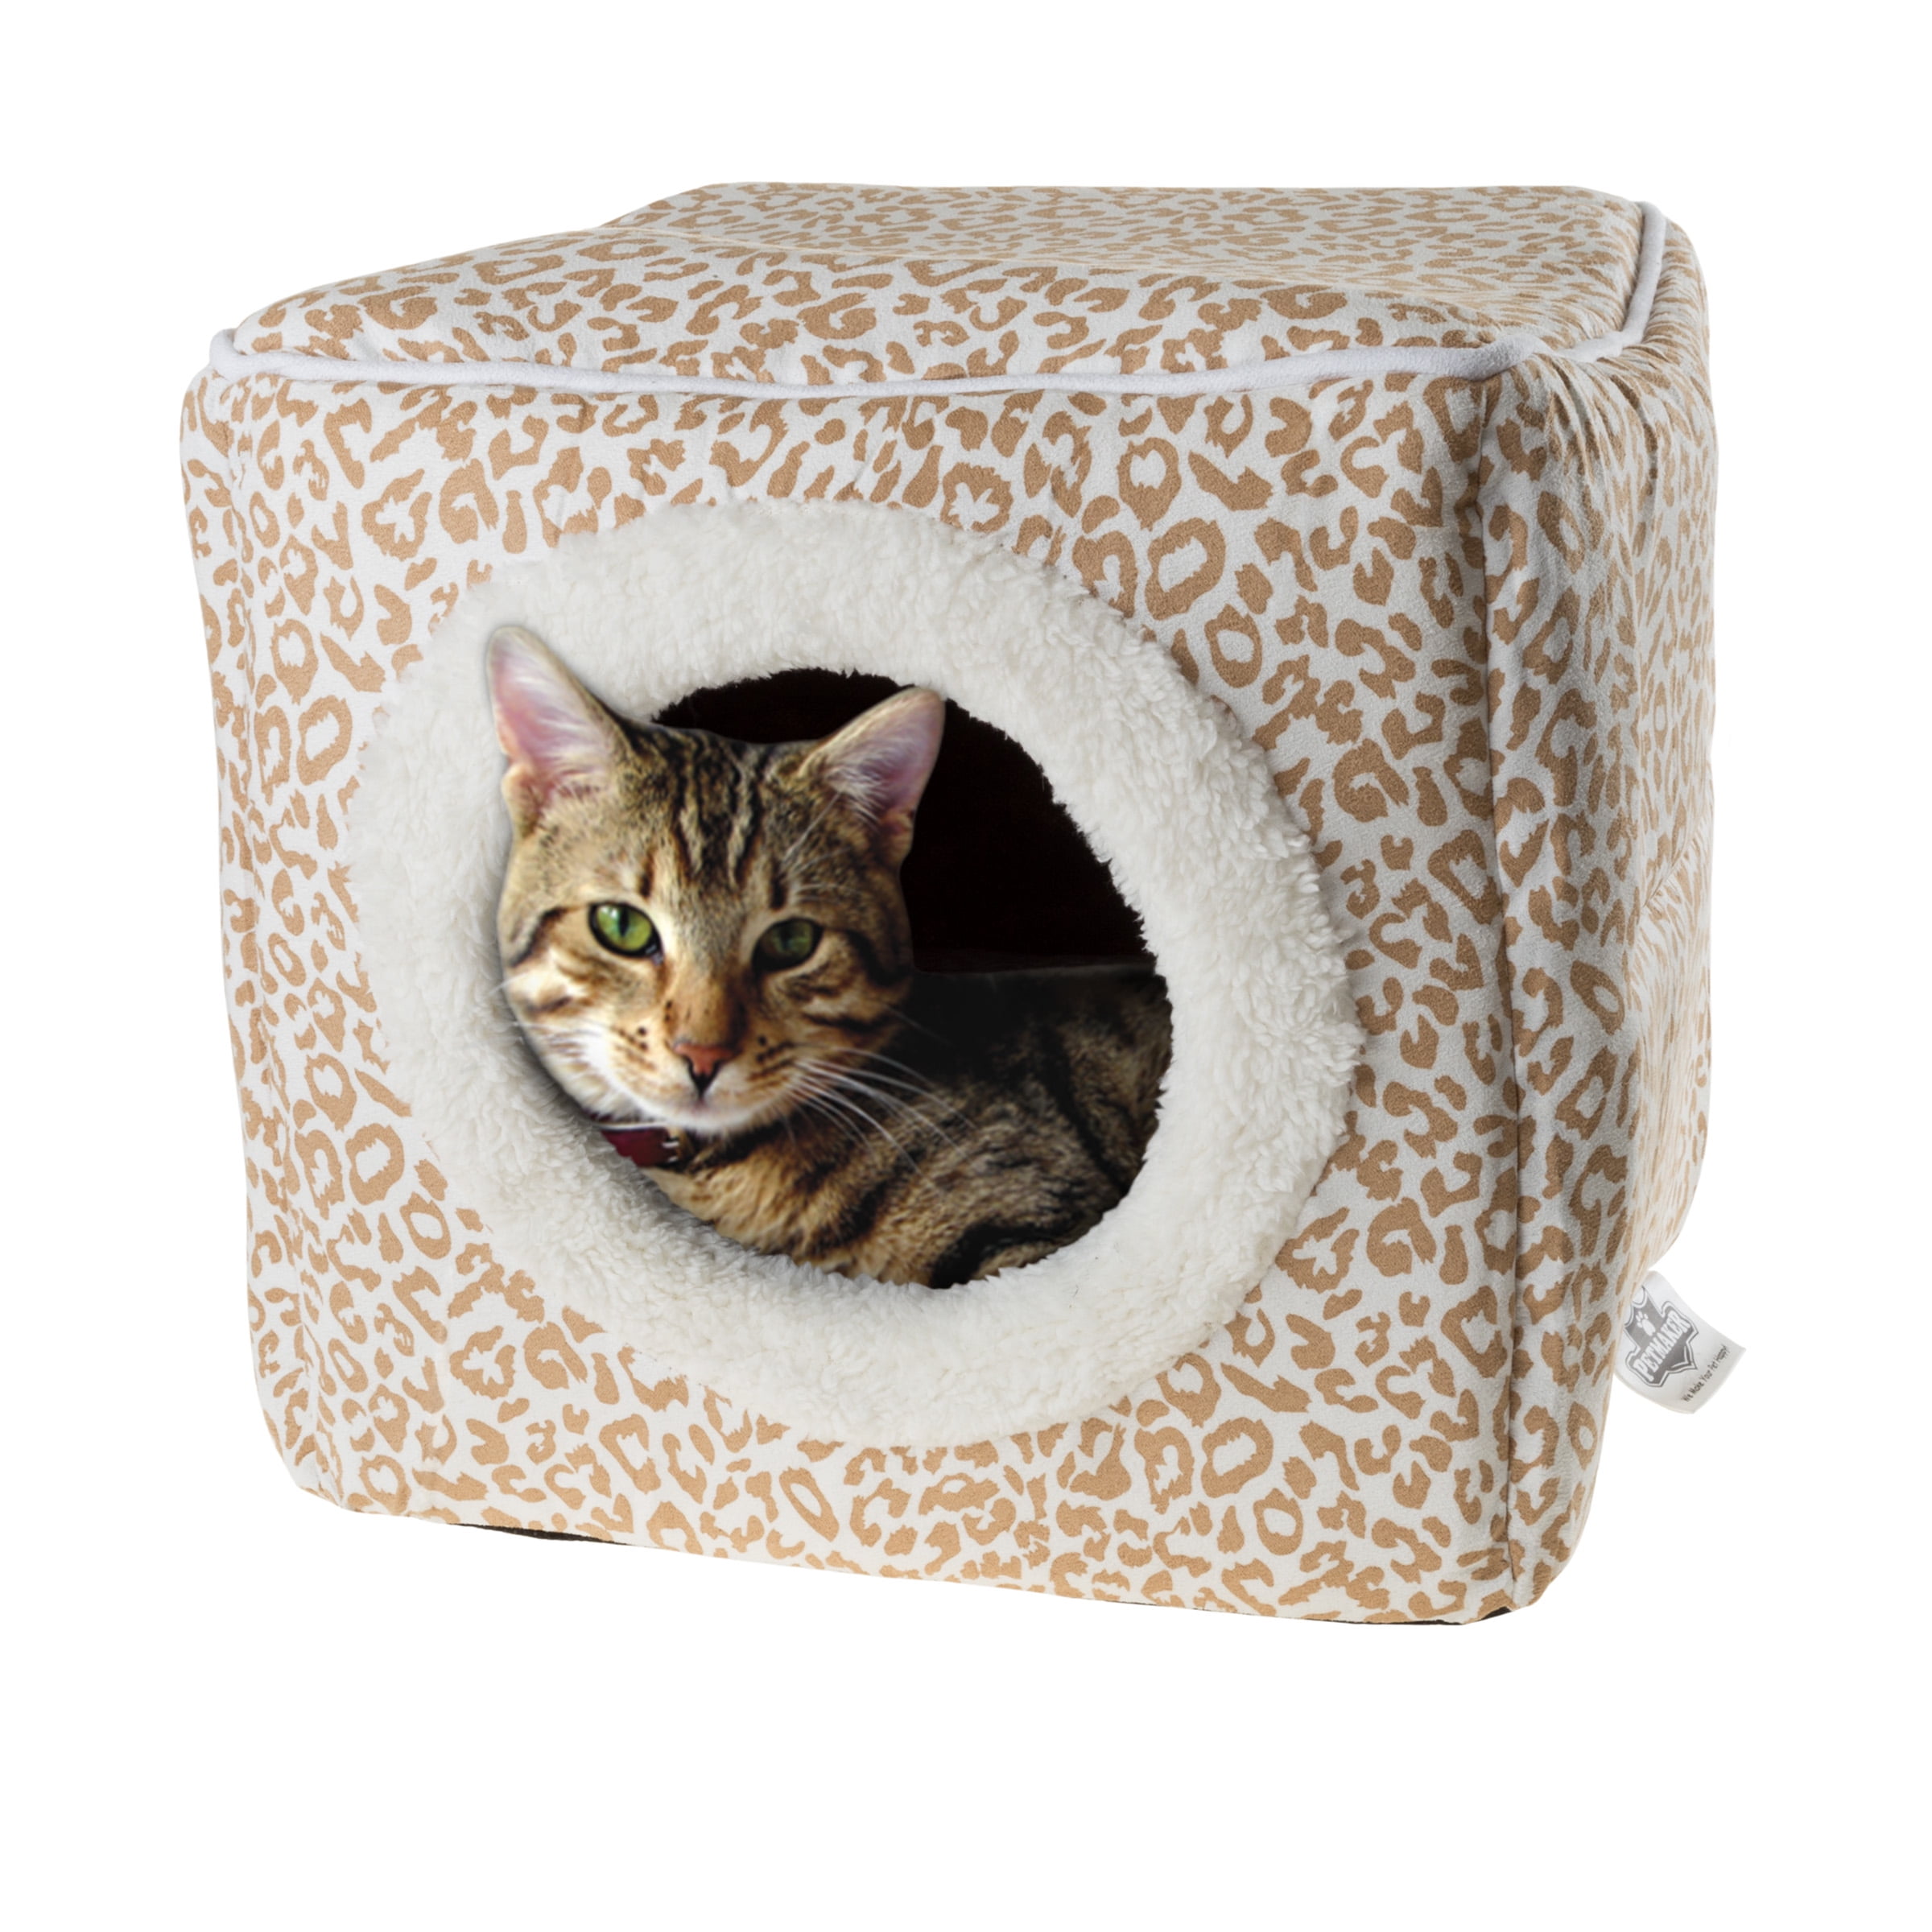 Dog & Cat Bed Cave Small Dogs Cosy Igloo House for Large Cats Kittens Cuddly Sleeping Place for Your Pet